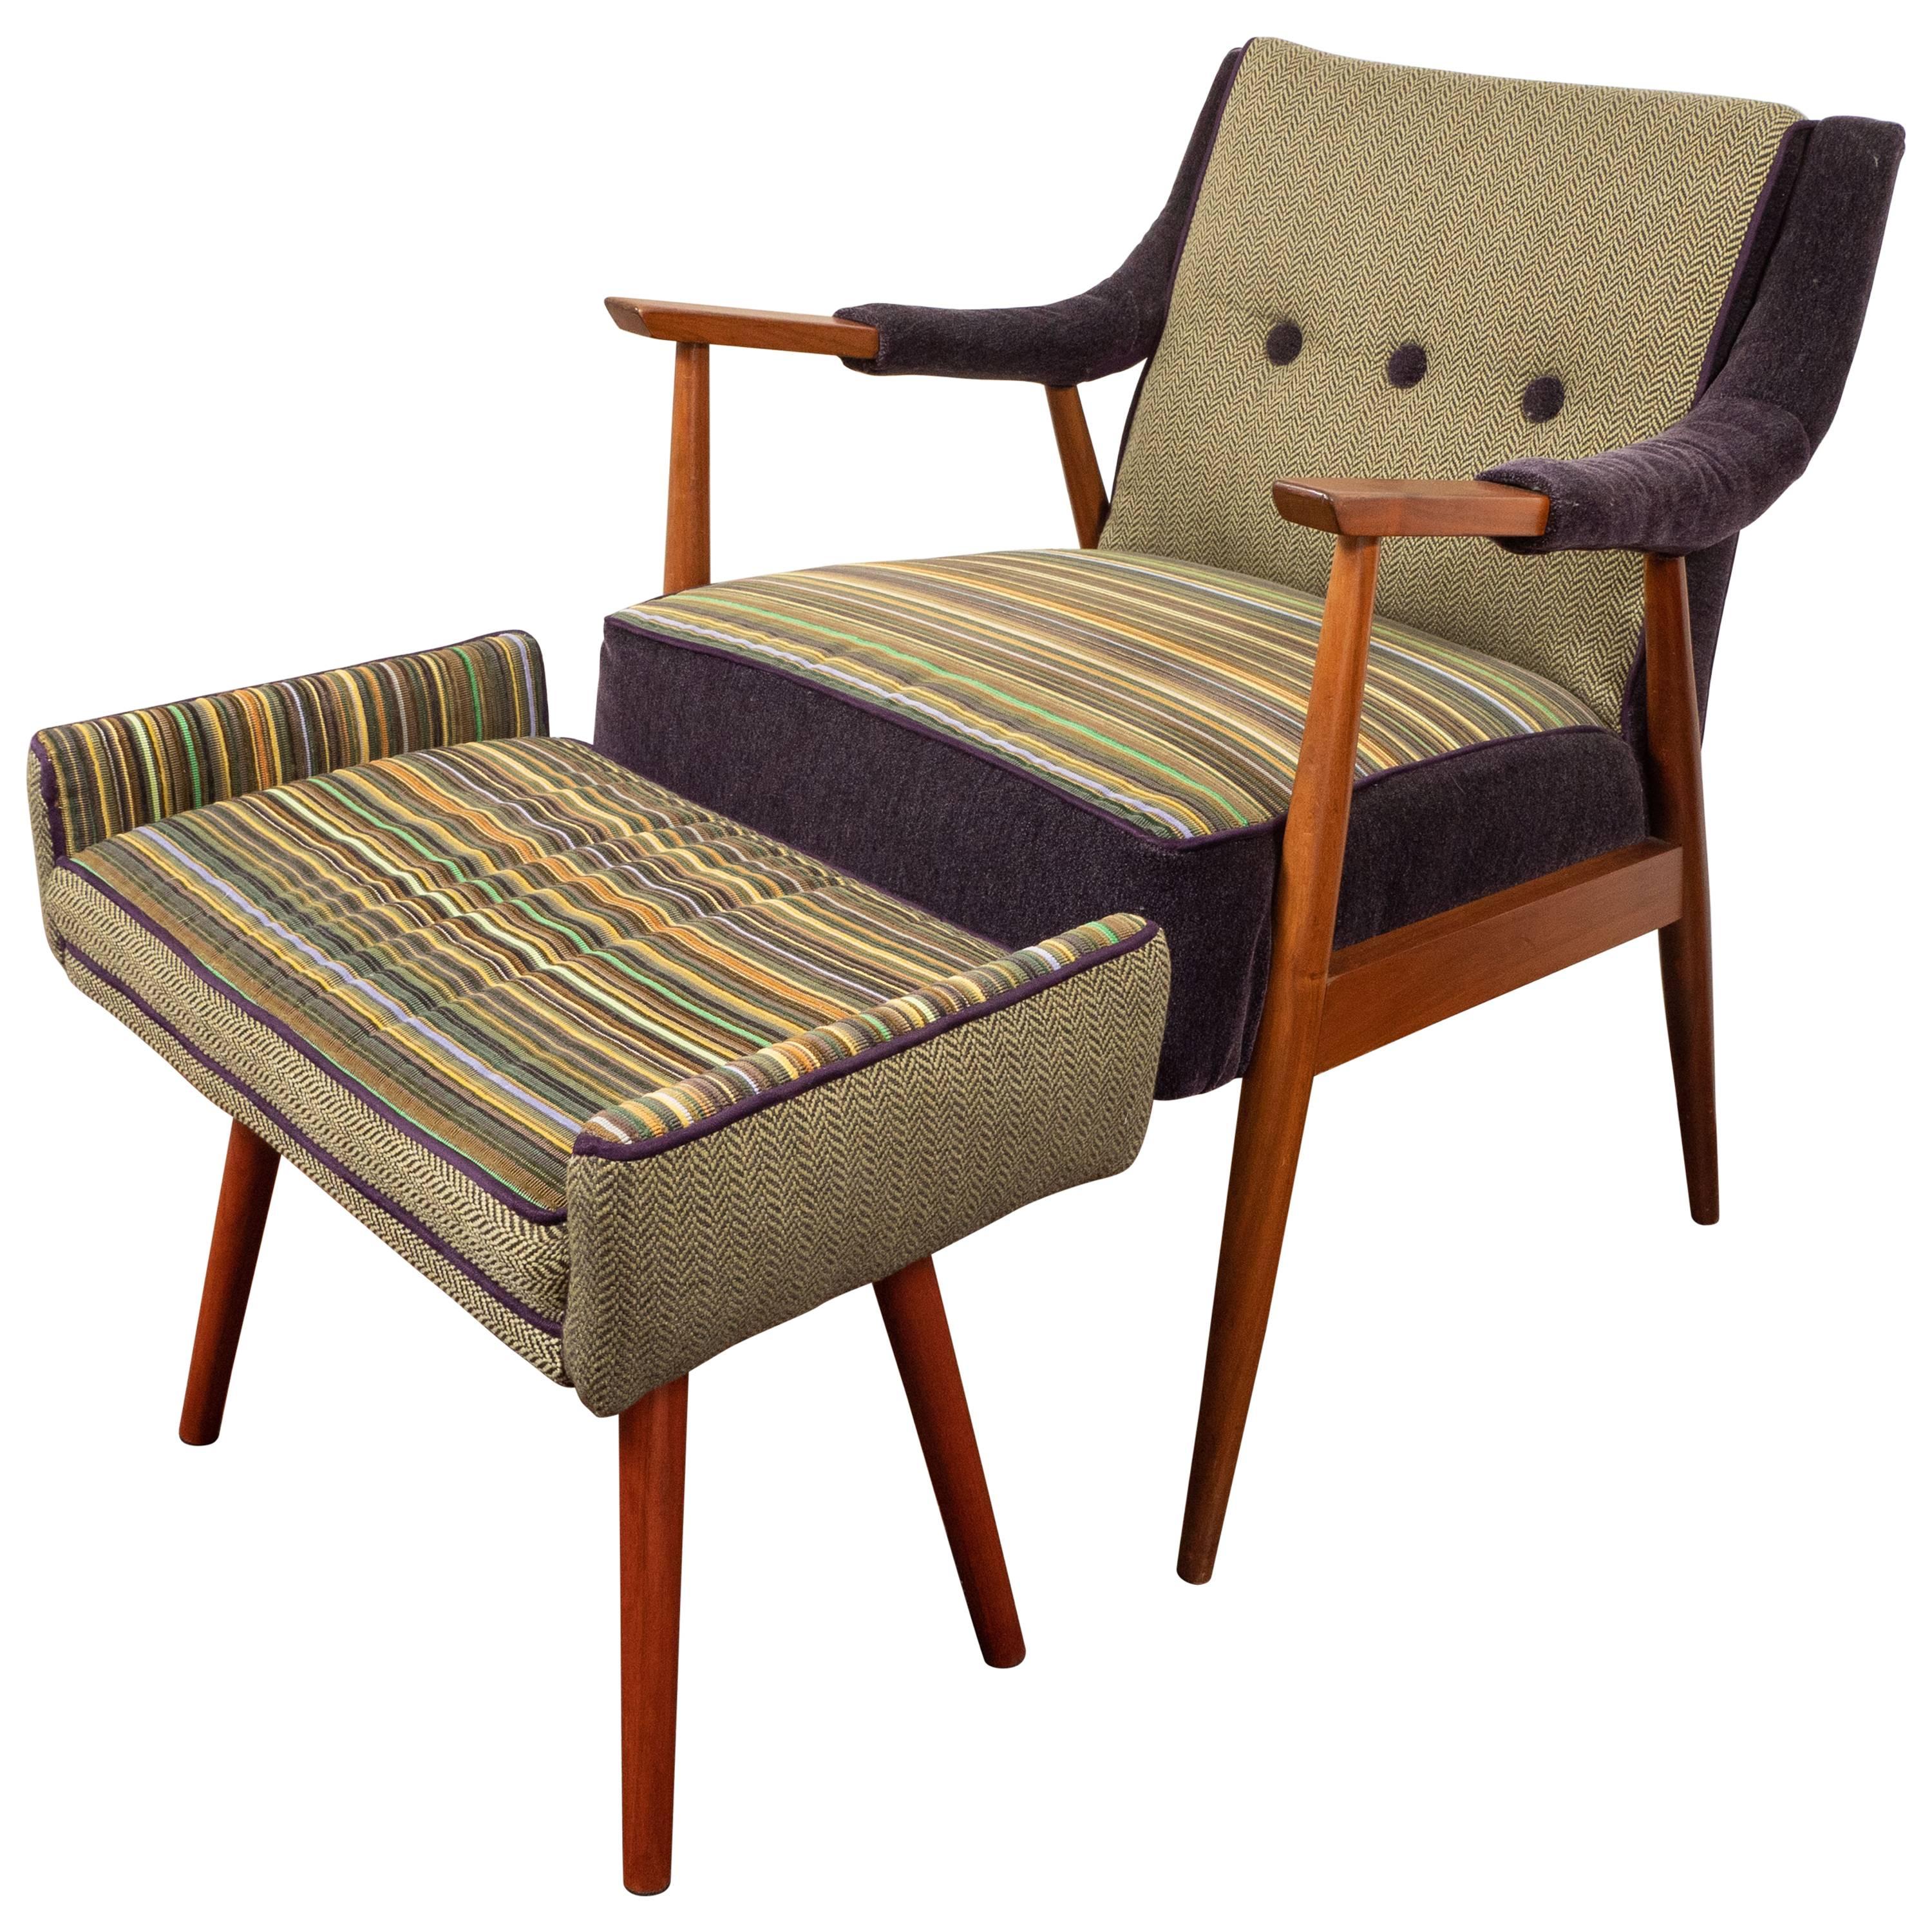 Midcentury Chair and Footstool with New Upholstery